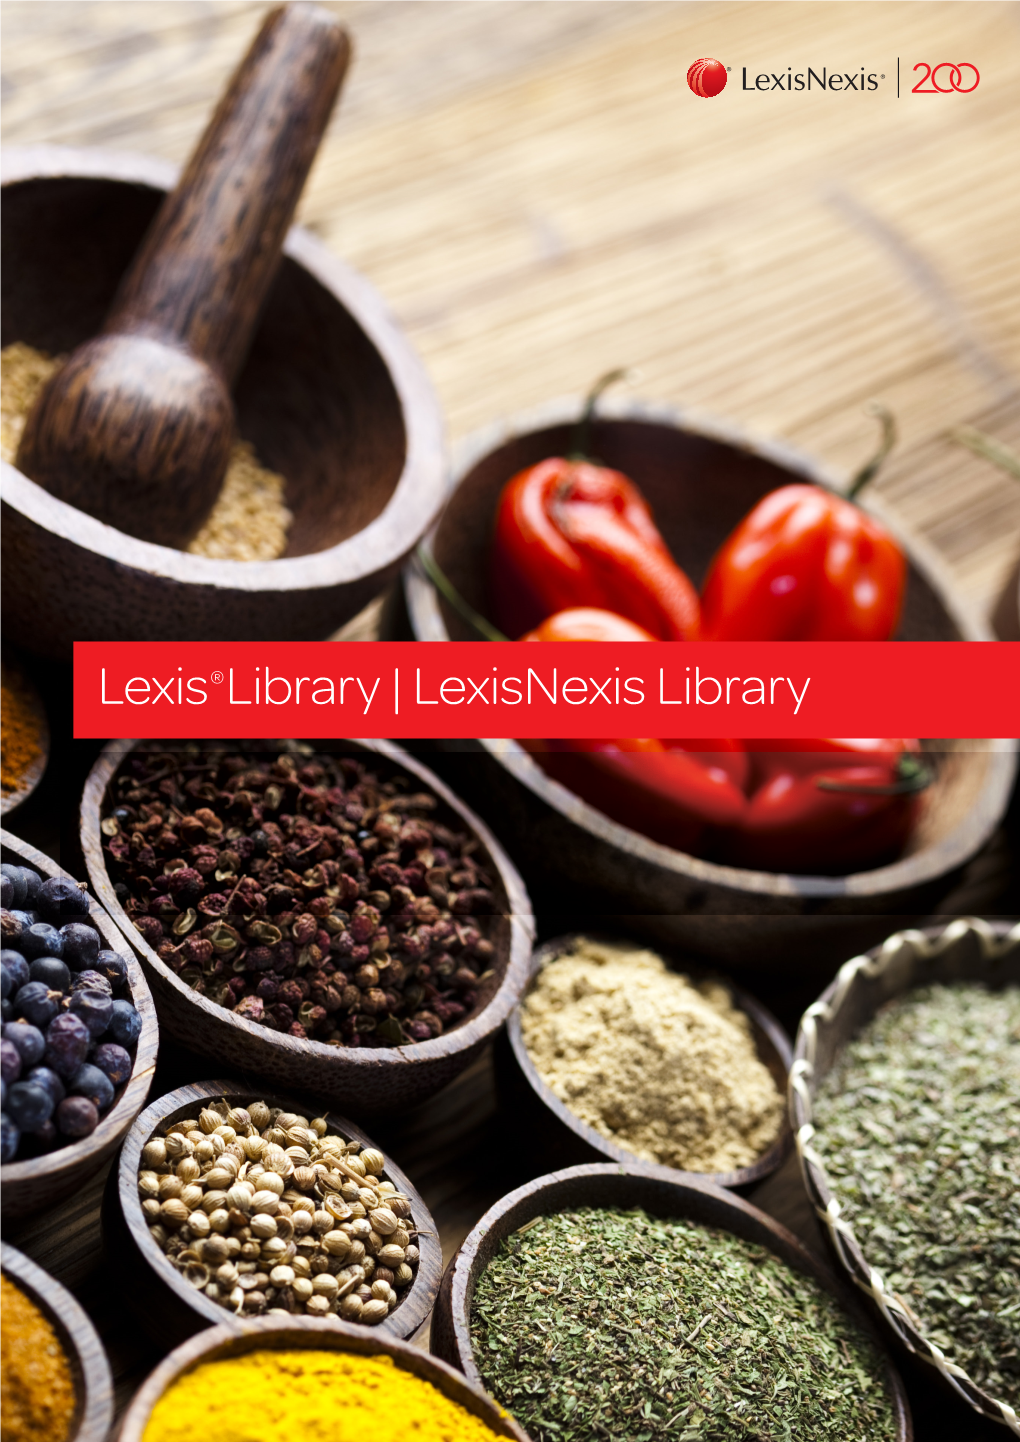 Lexis ®Library | Lexisnexis Library Save Time and Stay Up-To-Date with Access to Over 700,000 Cases, Annotated Legislation and Exclusive Commentary Online